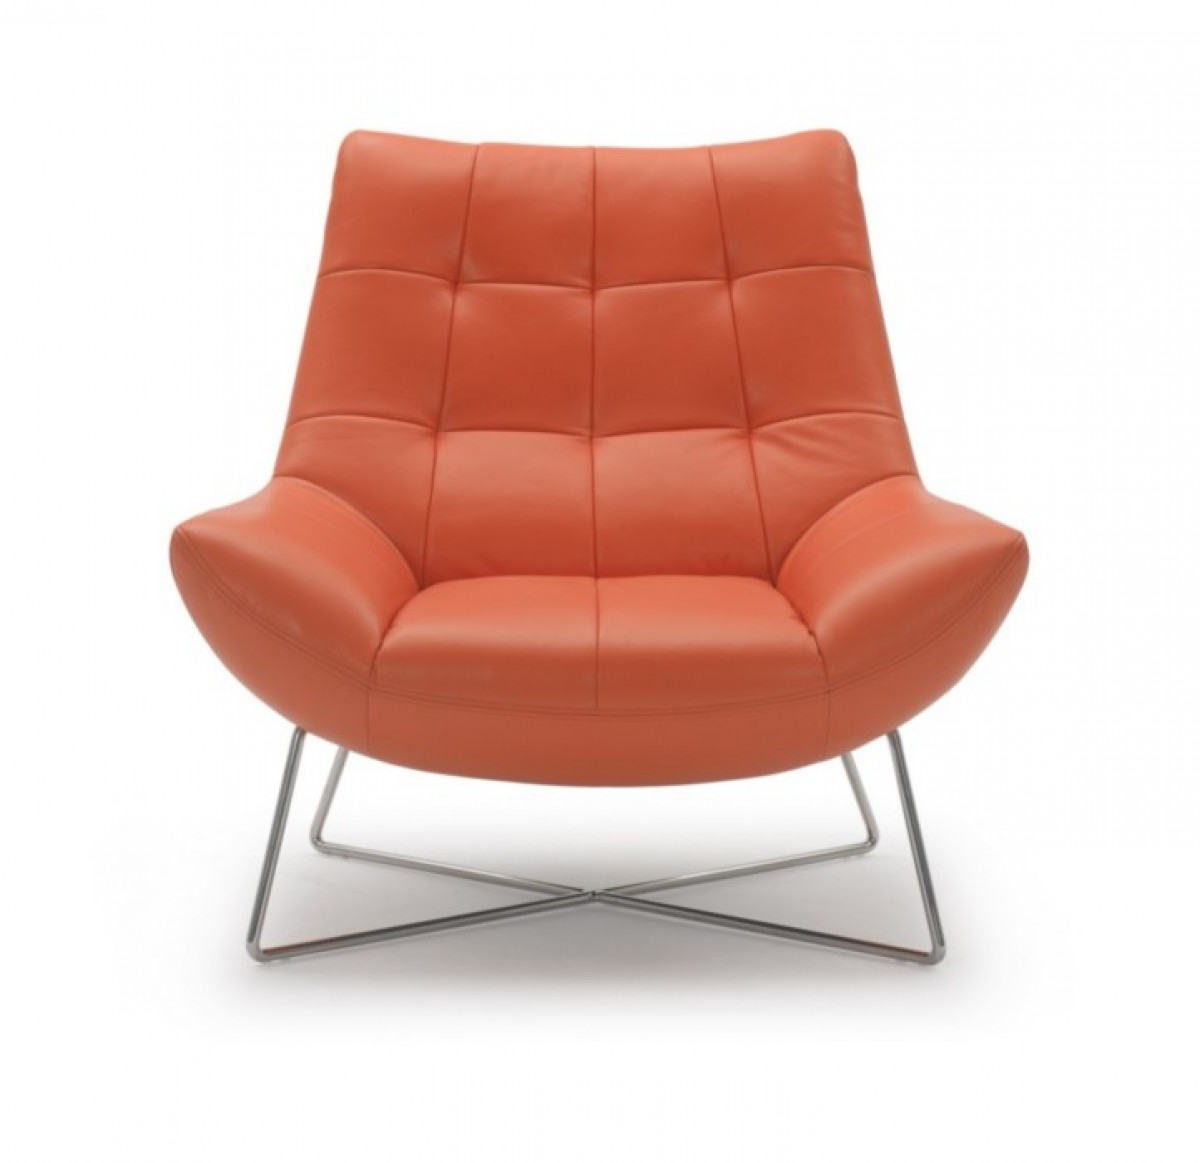 Modern Orange Leather and Stainless Steel Lounge Chair